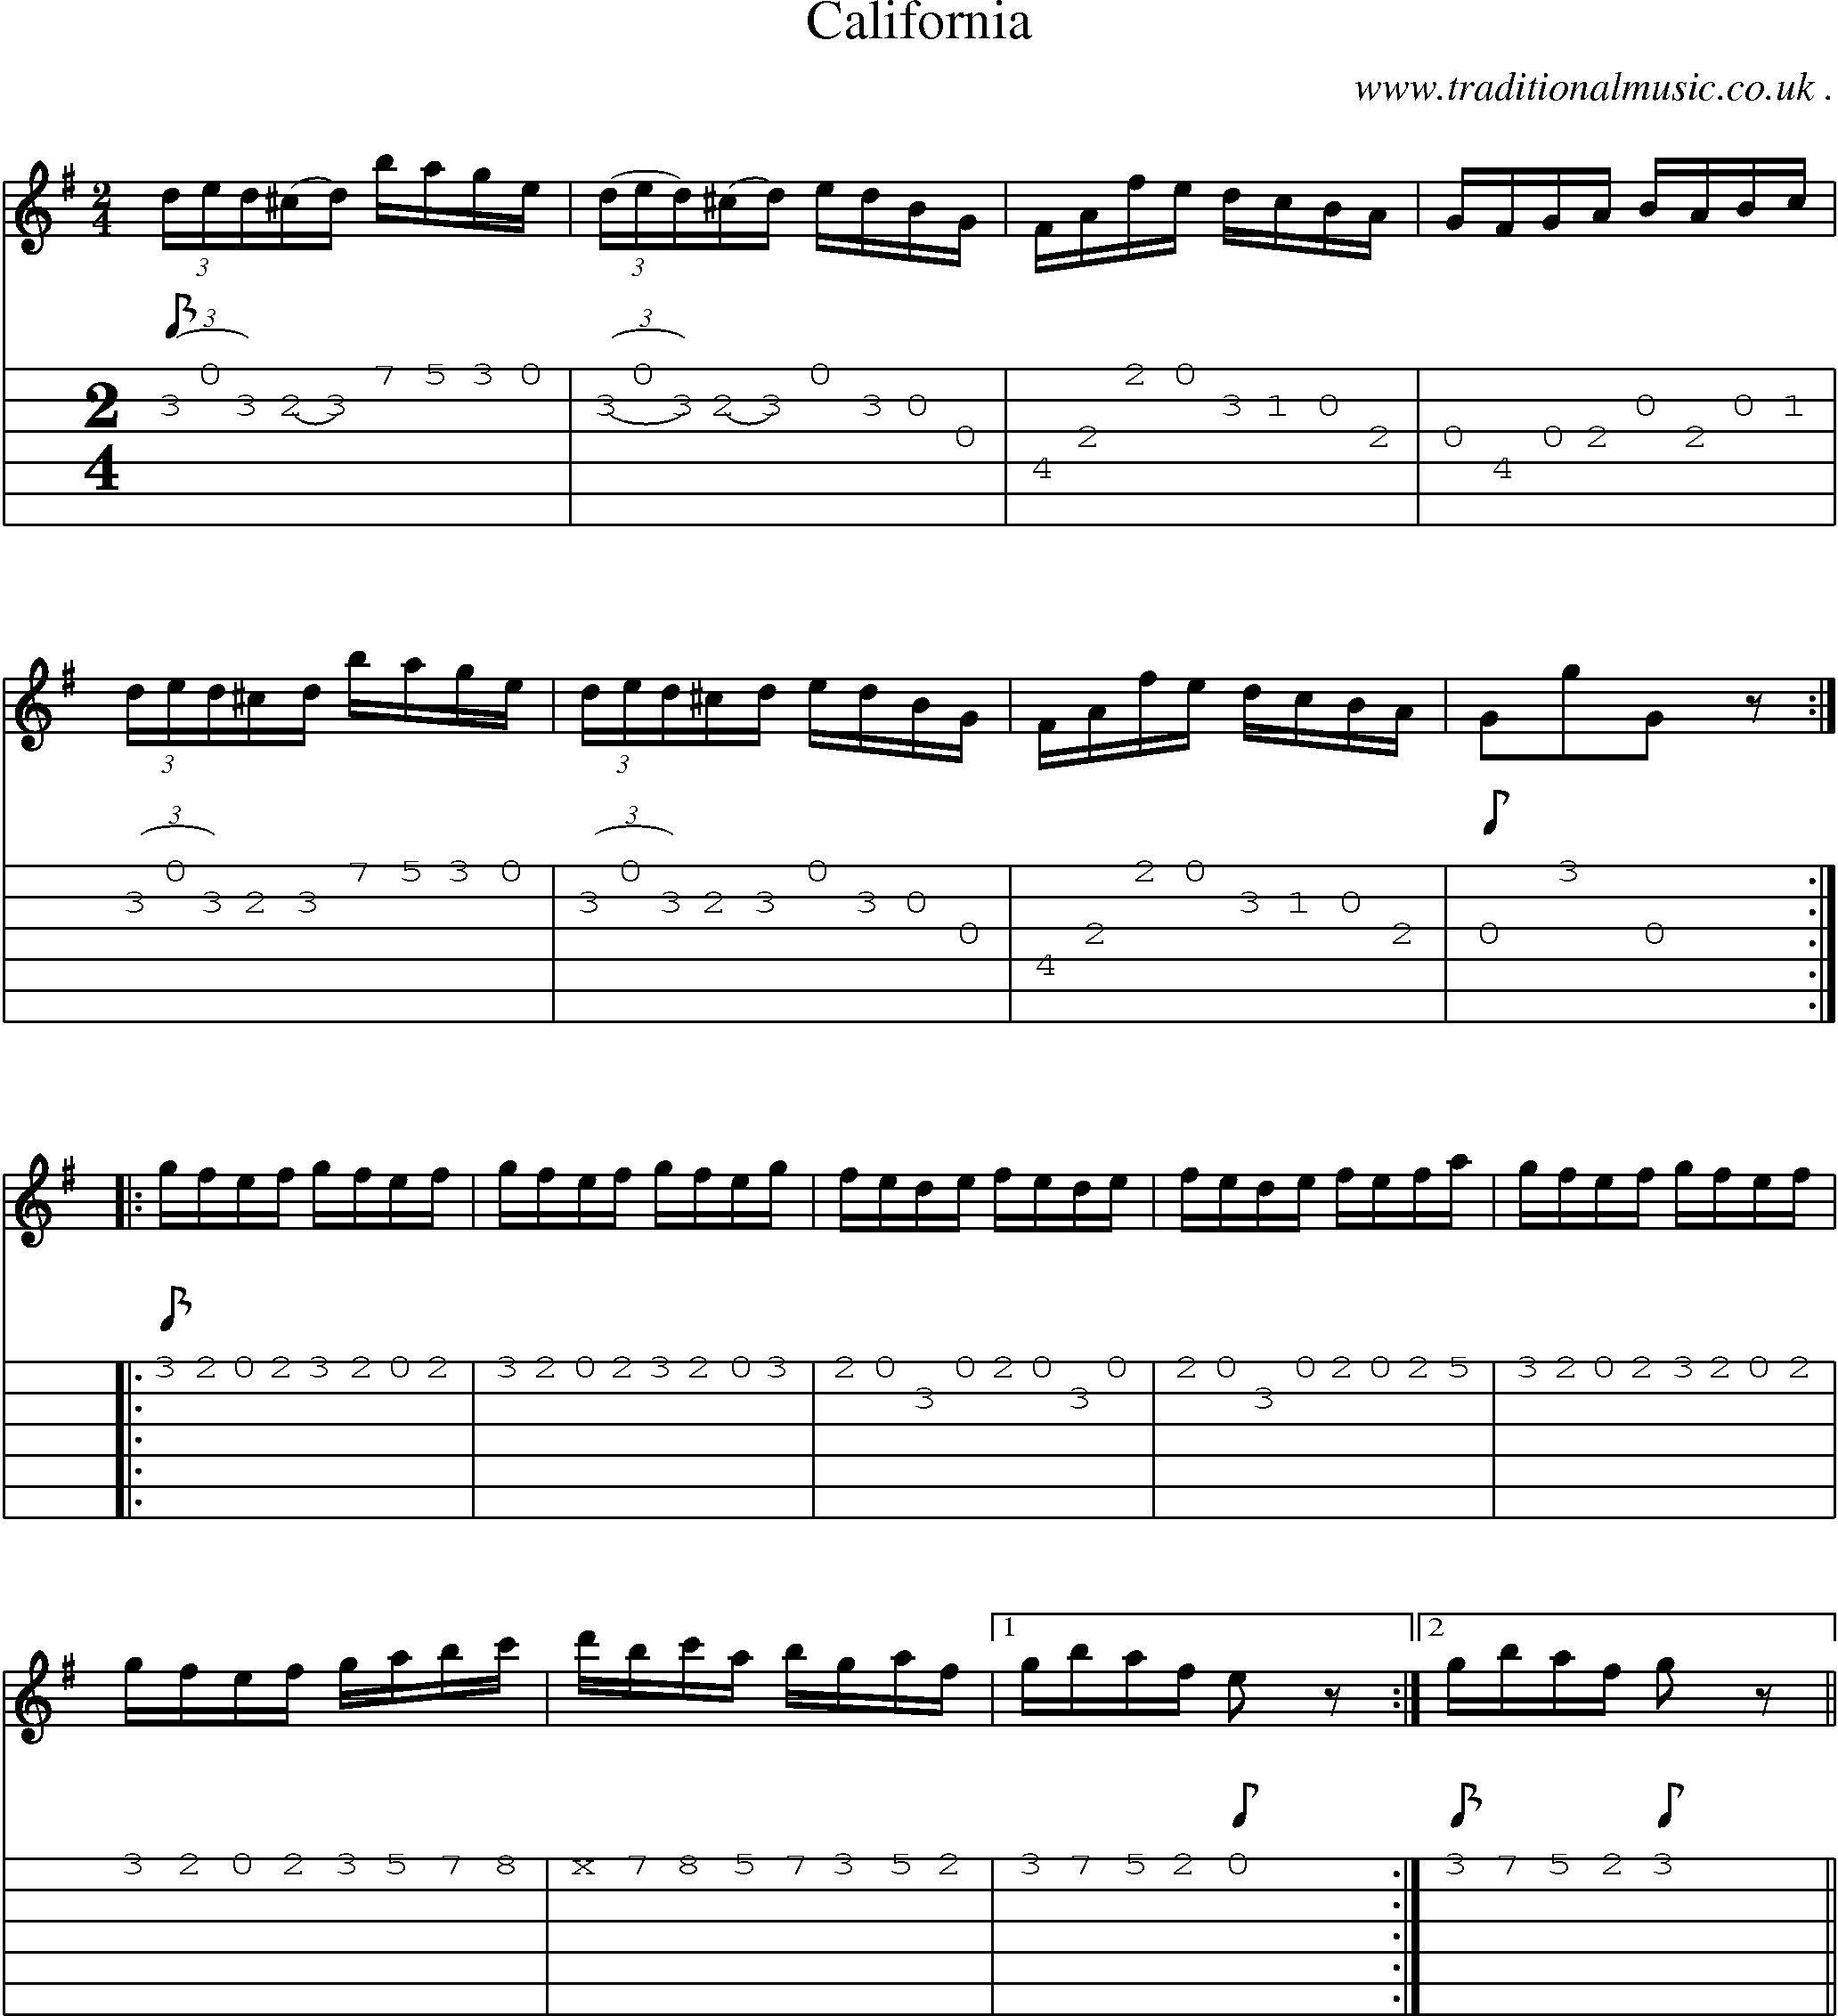 Sheet-Music and Guitar Tabs for California